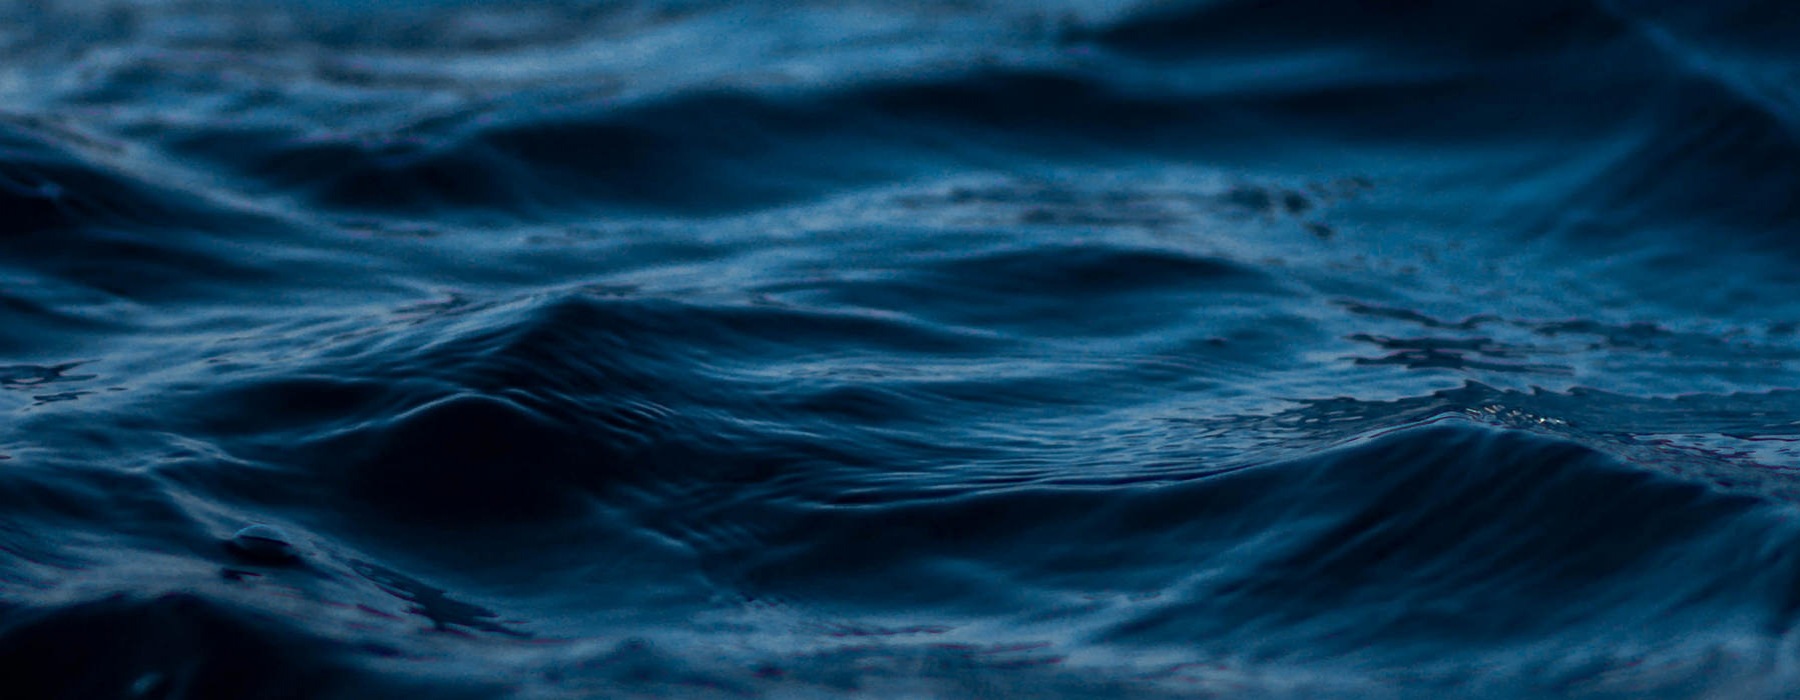 stock image of blue water ripples